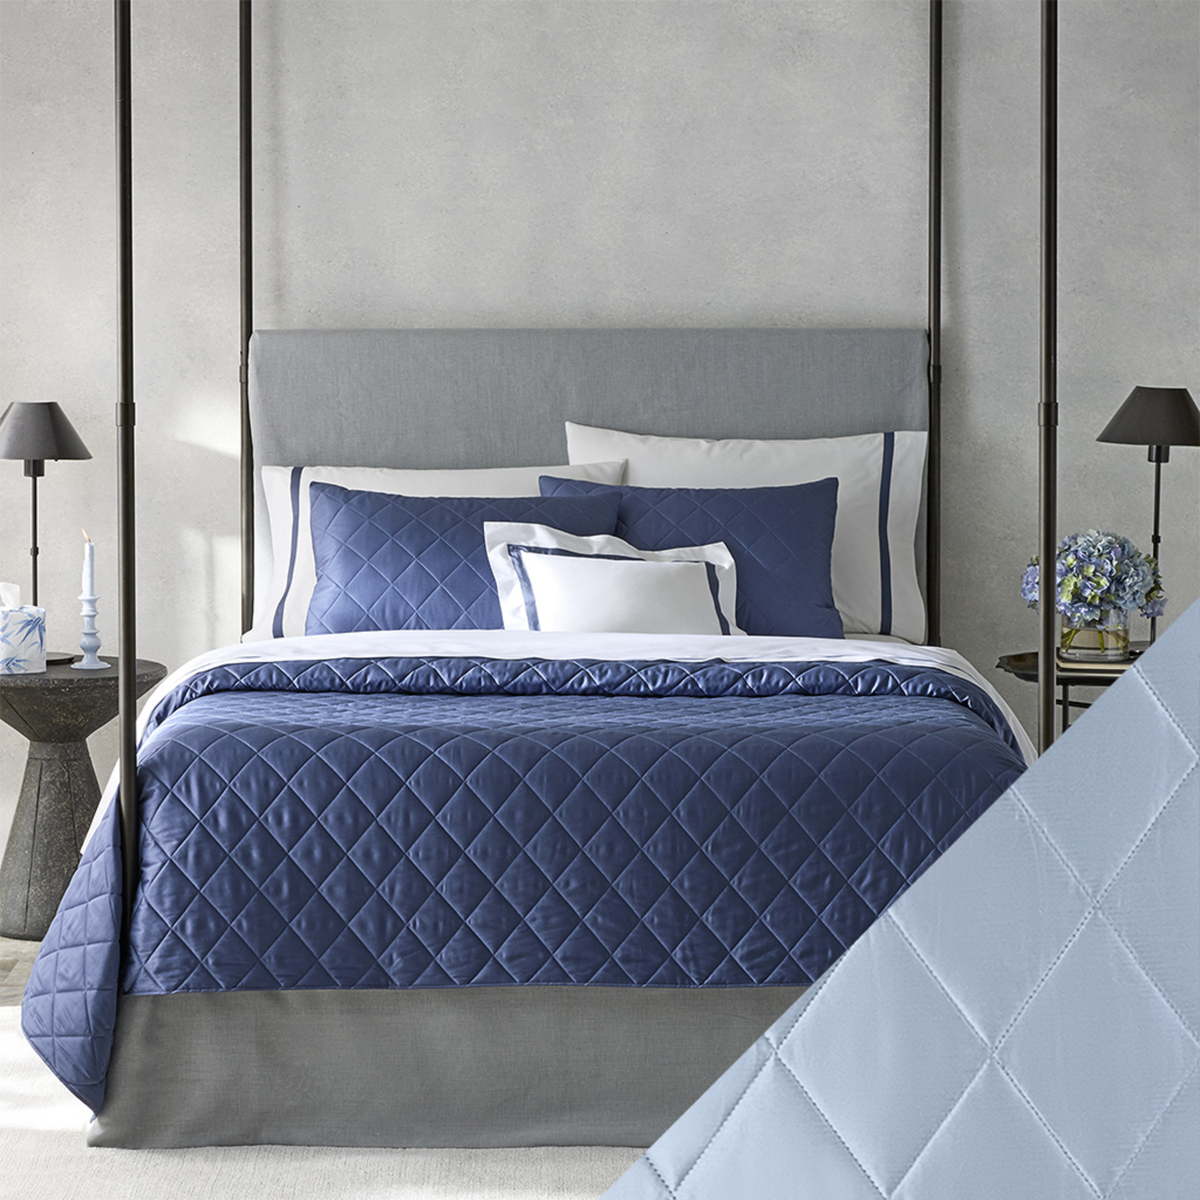 Matouk Nocturne Bedding Main Image with Swatch in Hazy Blue